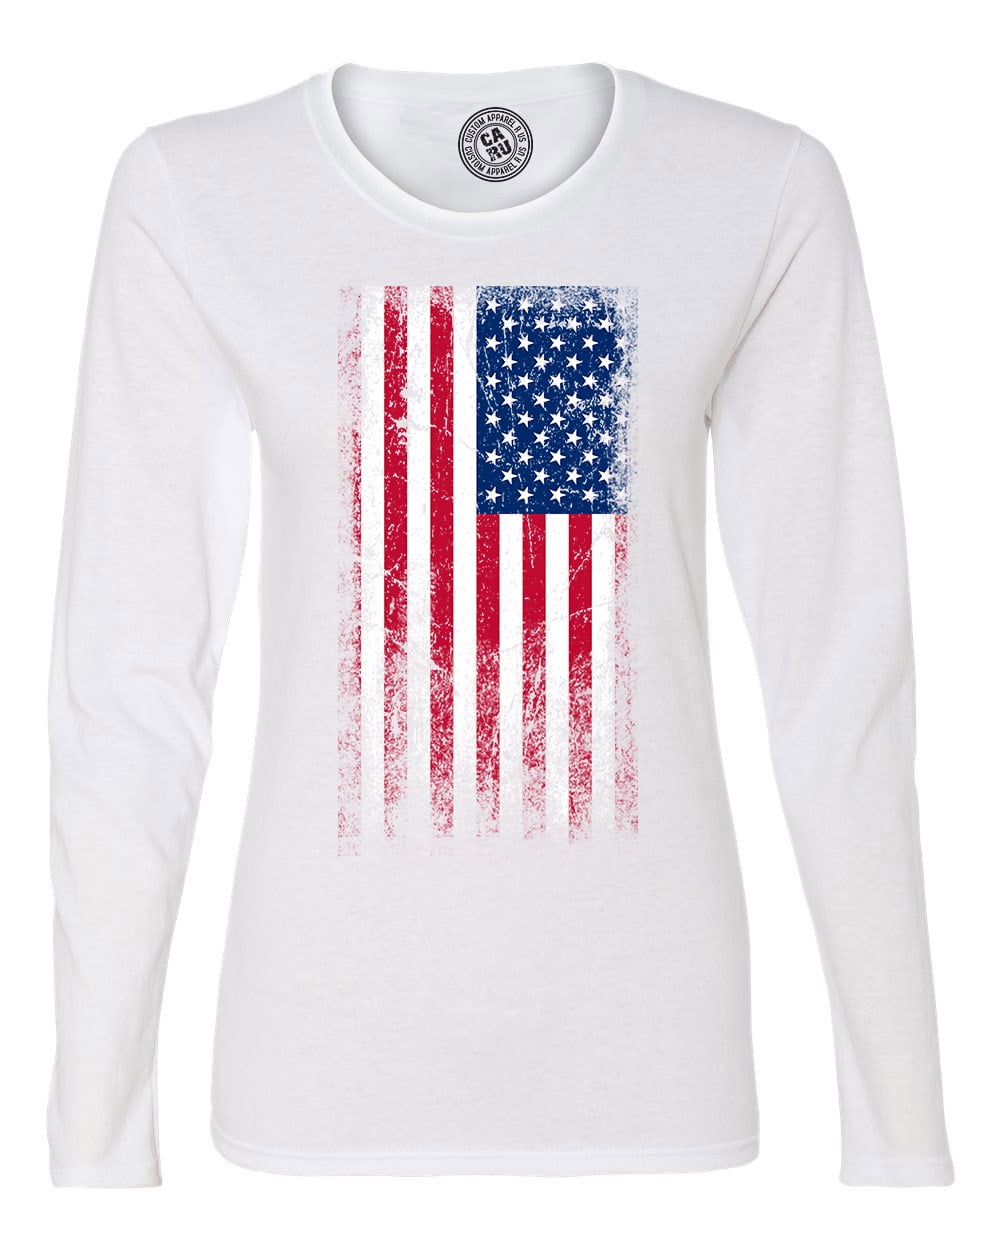 red white and blue flag shirts